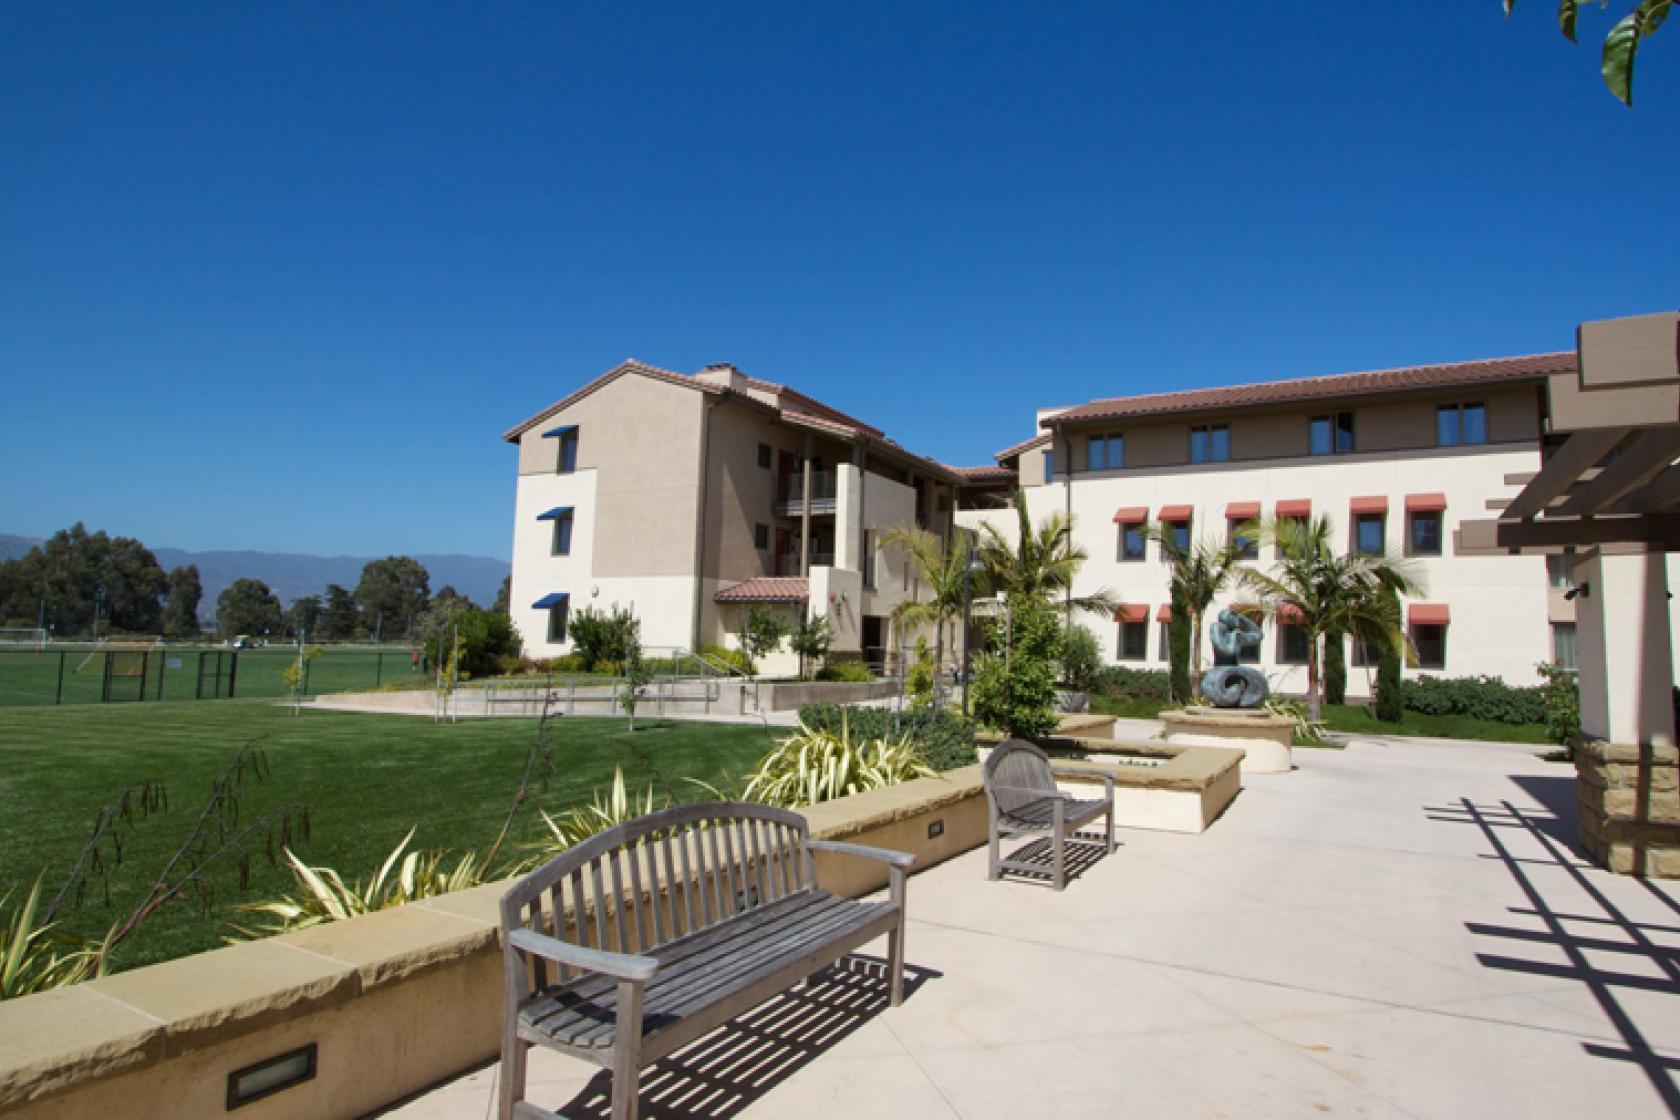 grass area in the San Clemente Villages courtyard